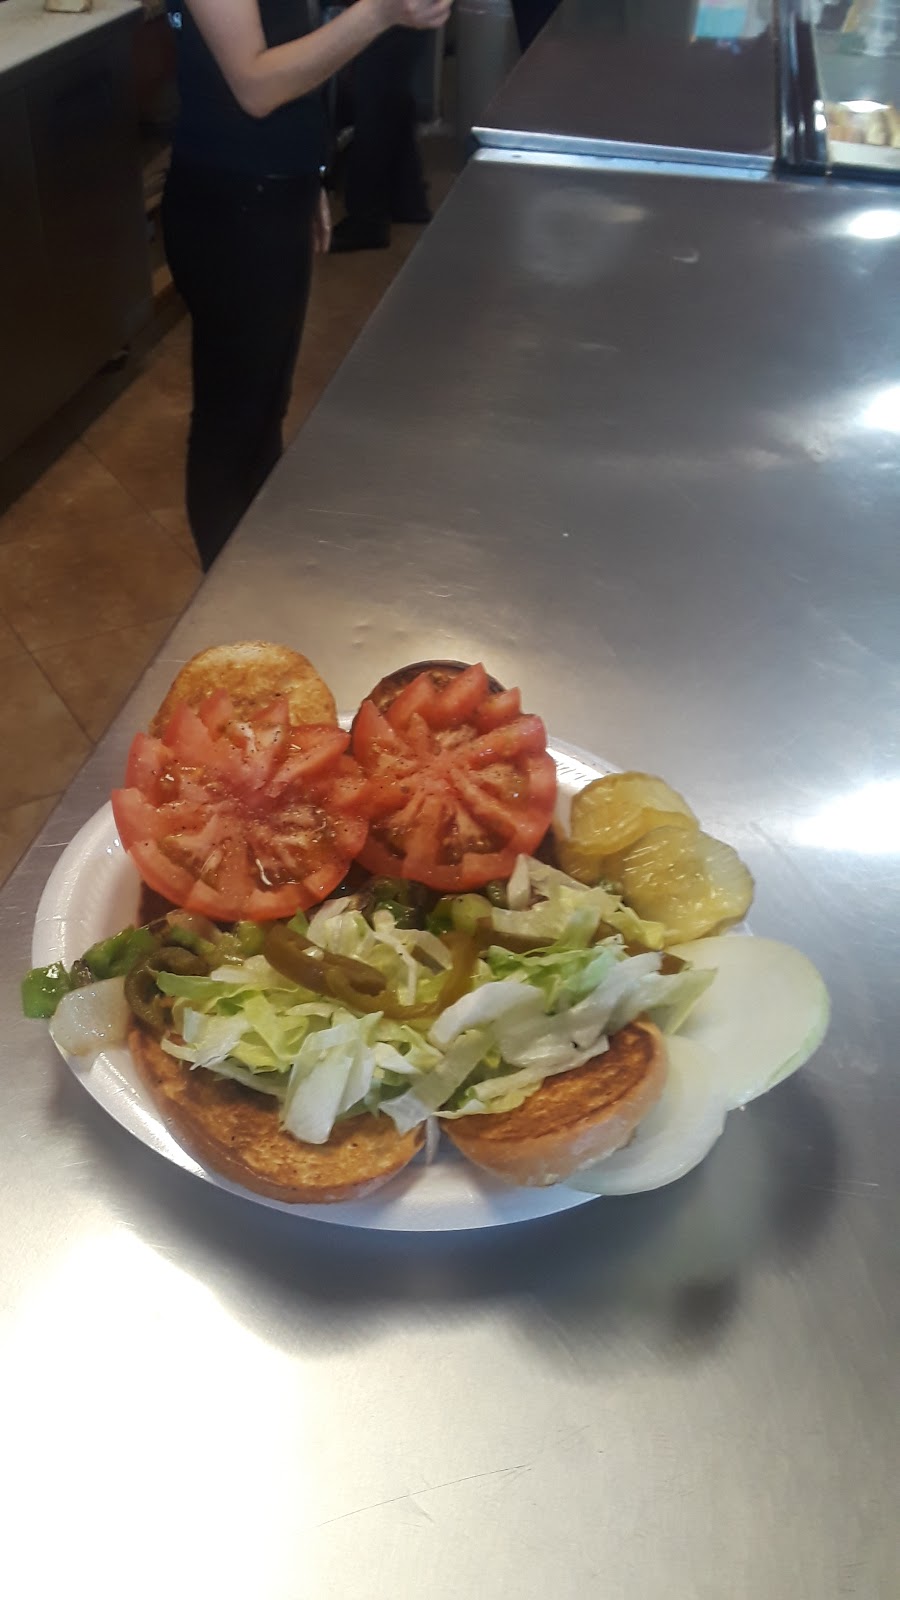 Hot Bagels and Deli | 34640 N North Valley Pkwy, Phoenix, AZ 85086, USA | Phone: (623) 516-2888